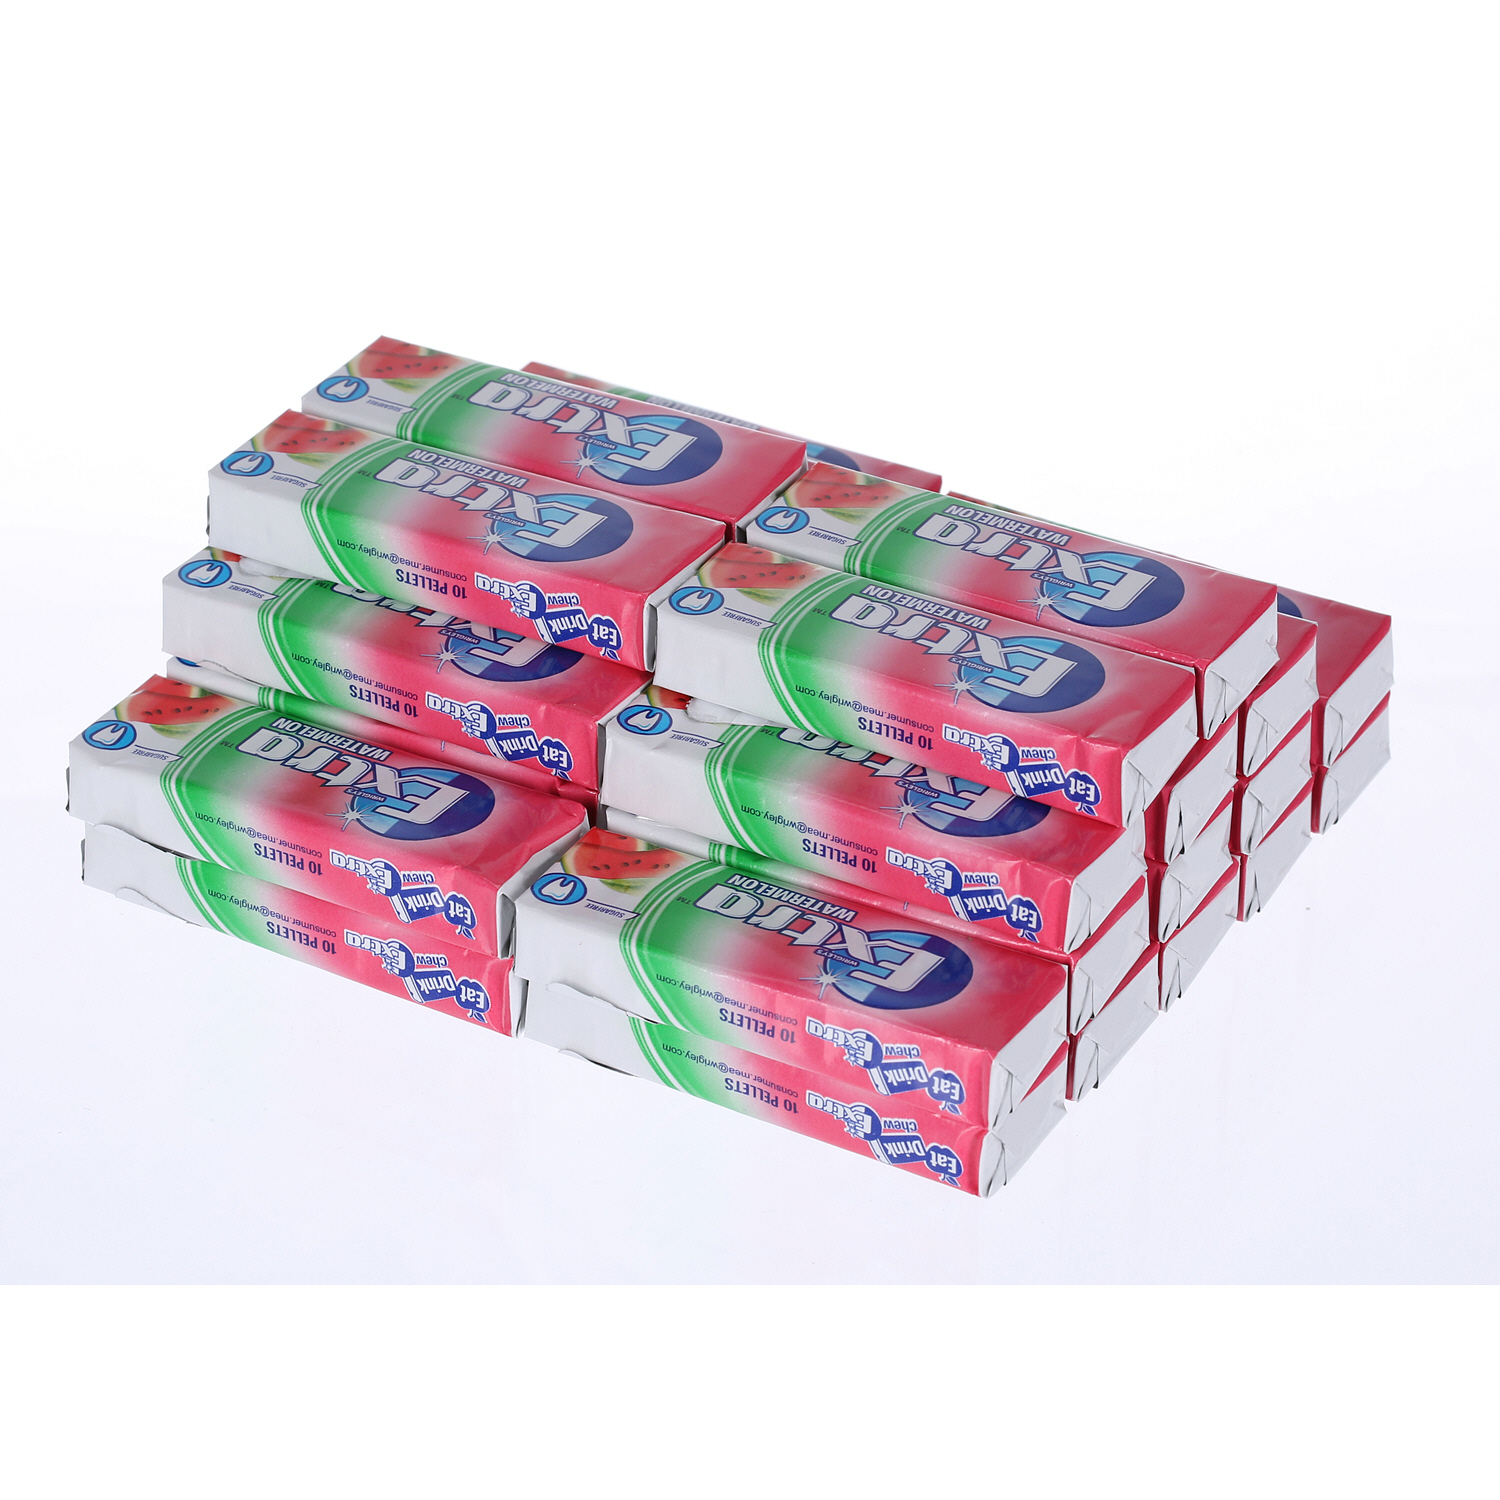 Wrigley's Extra Watermelon Chewing Gum 32.2gm × 30'S